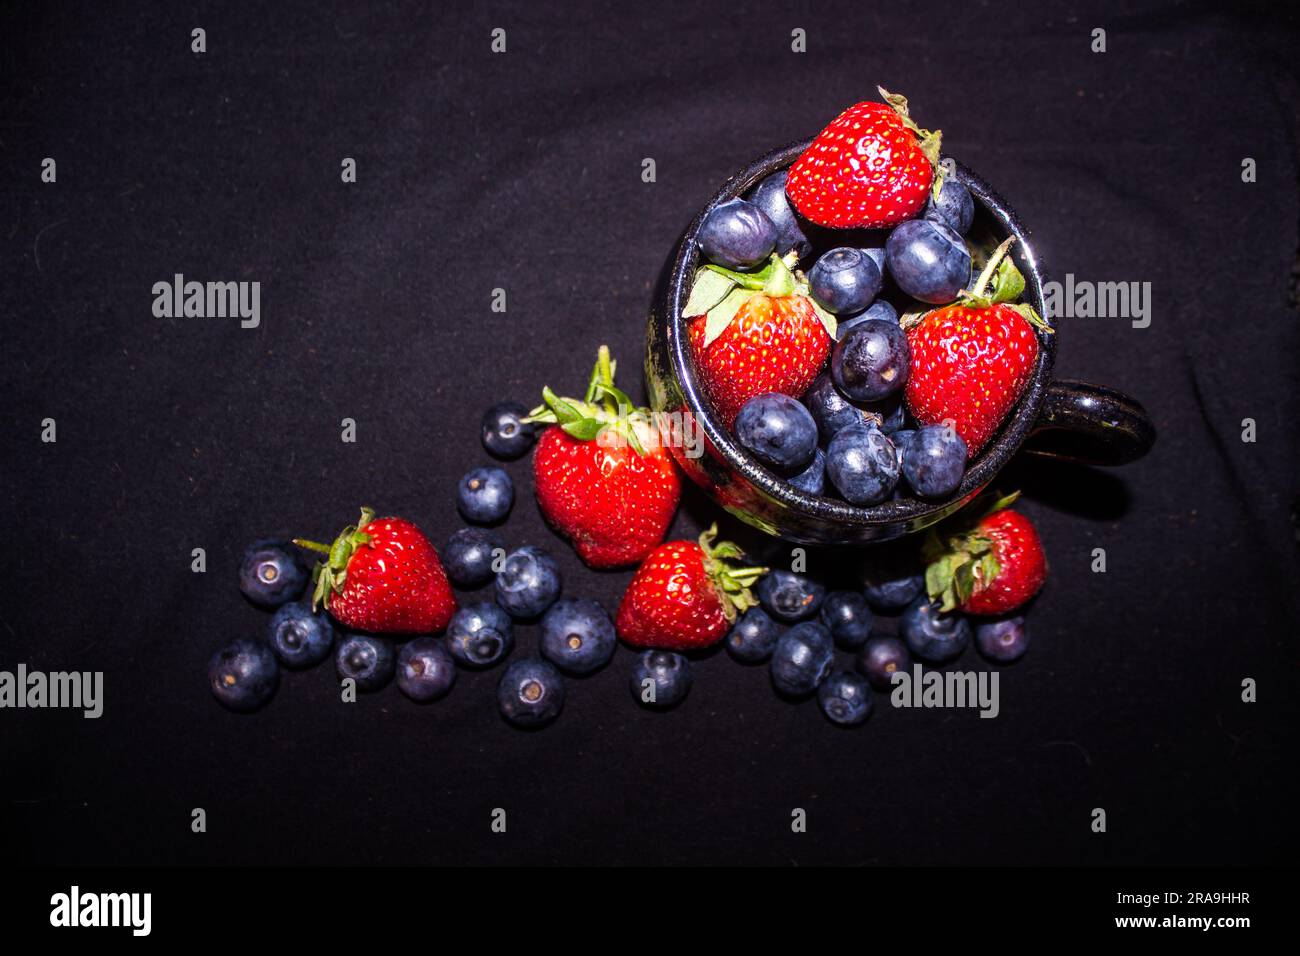 Composition of a teacup filled with blueberries and strawberries viewed from directly above against a black background Stock Photo